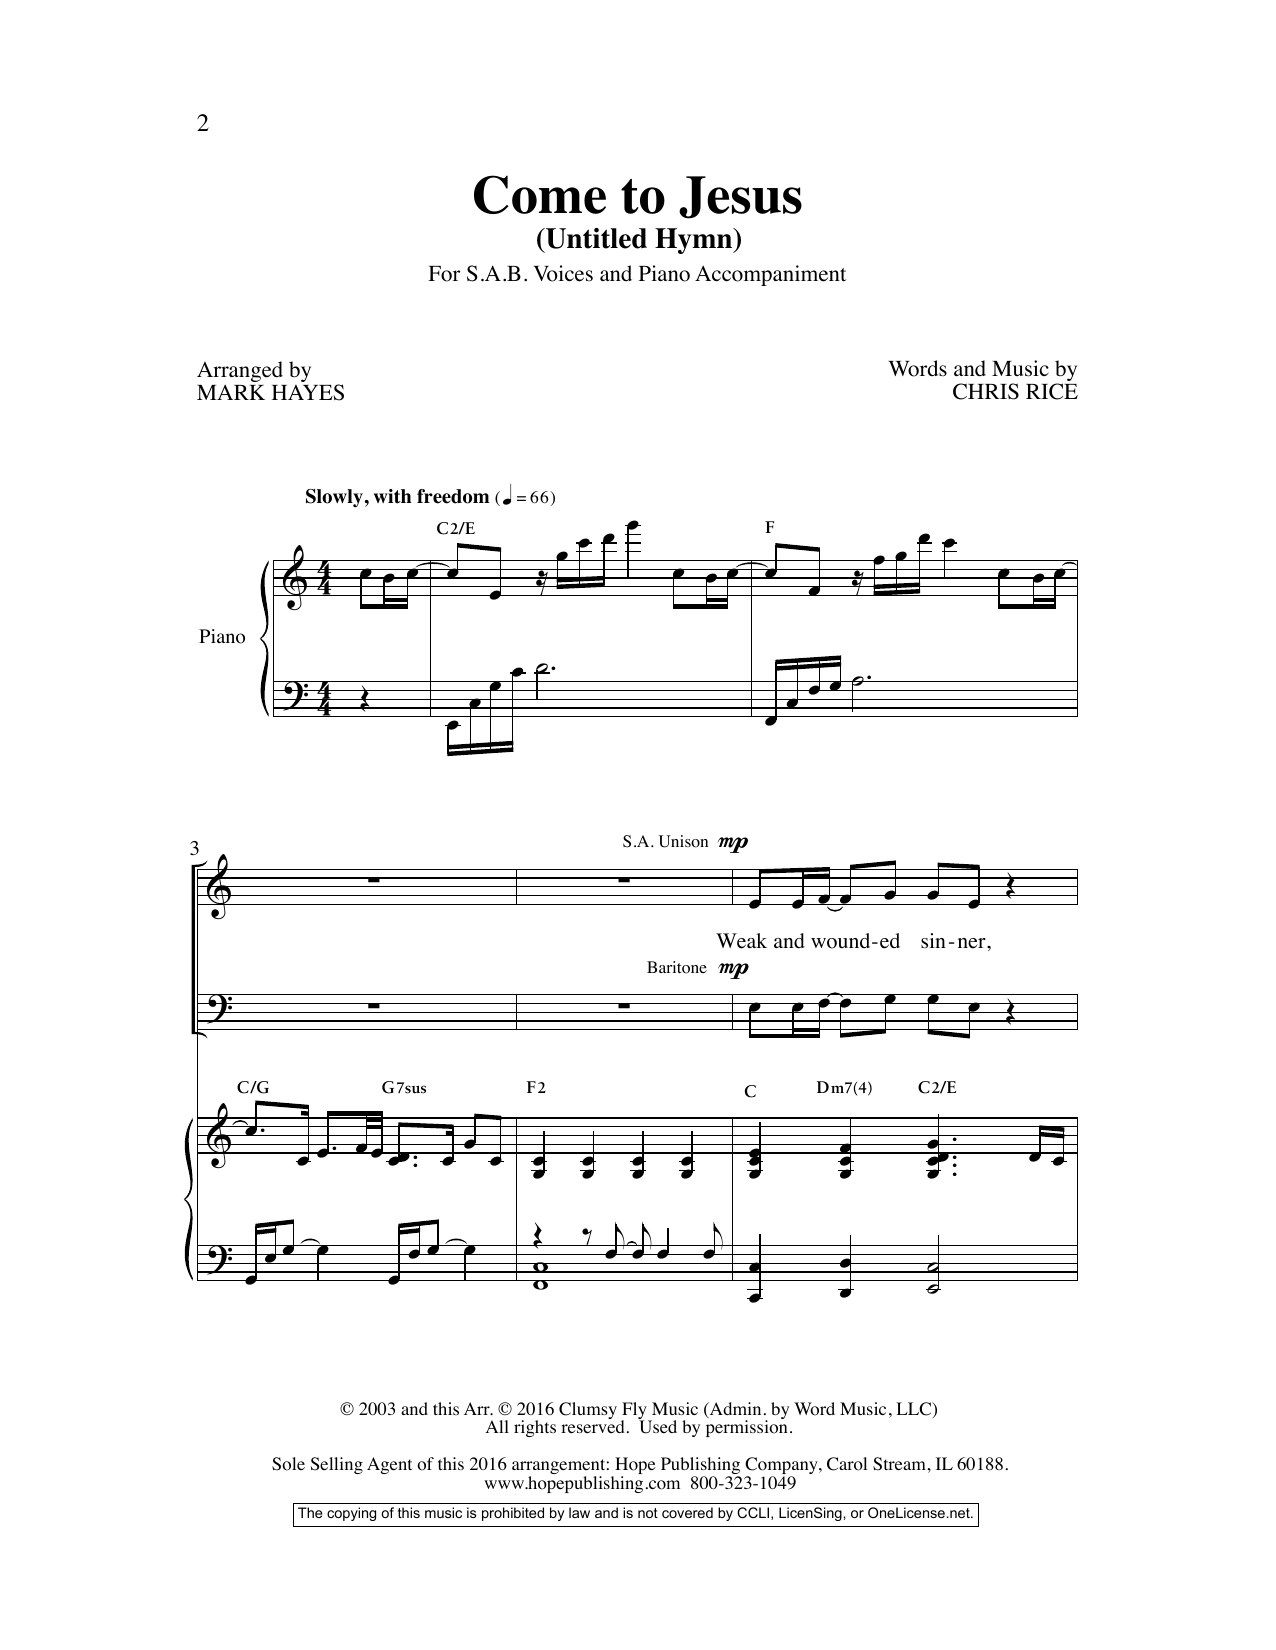 Download Chris Rice Come to Jesus (Untitled Hymn) (arr. Mar Sheet Music